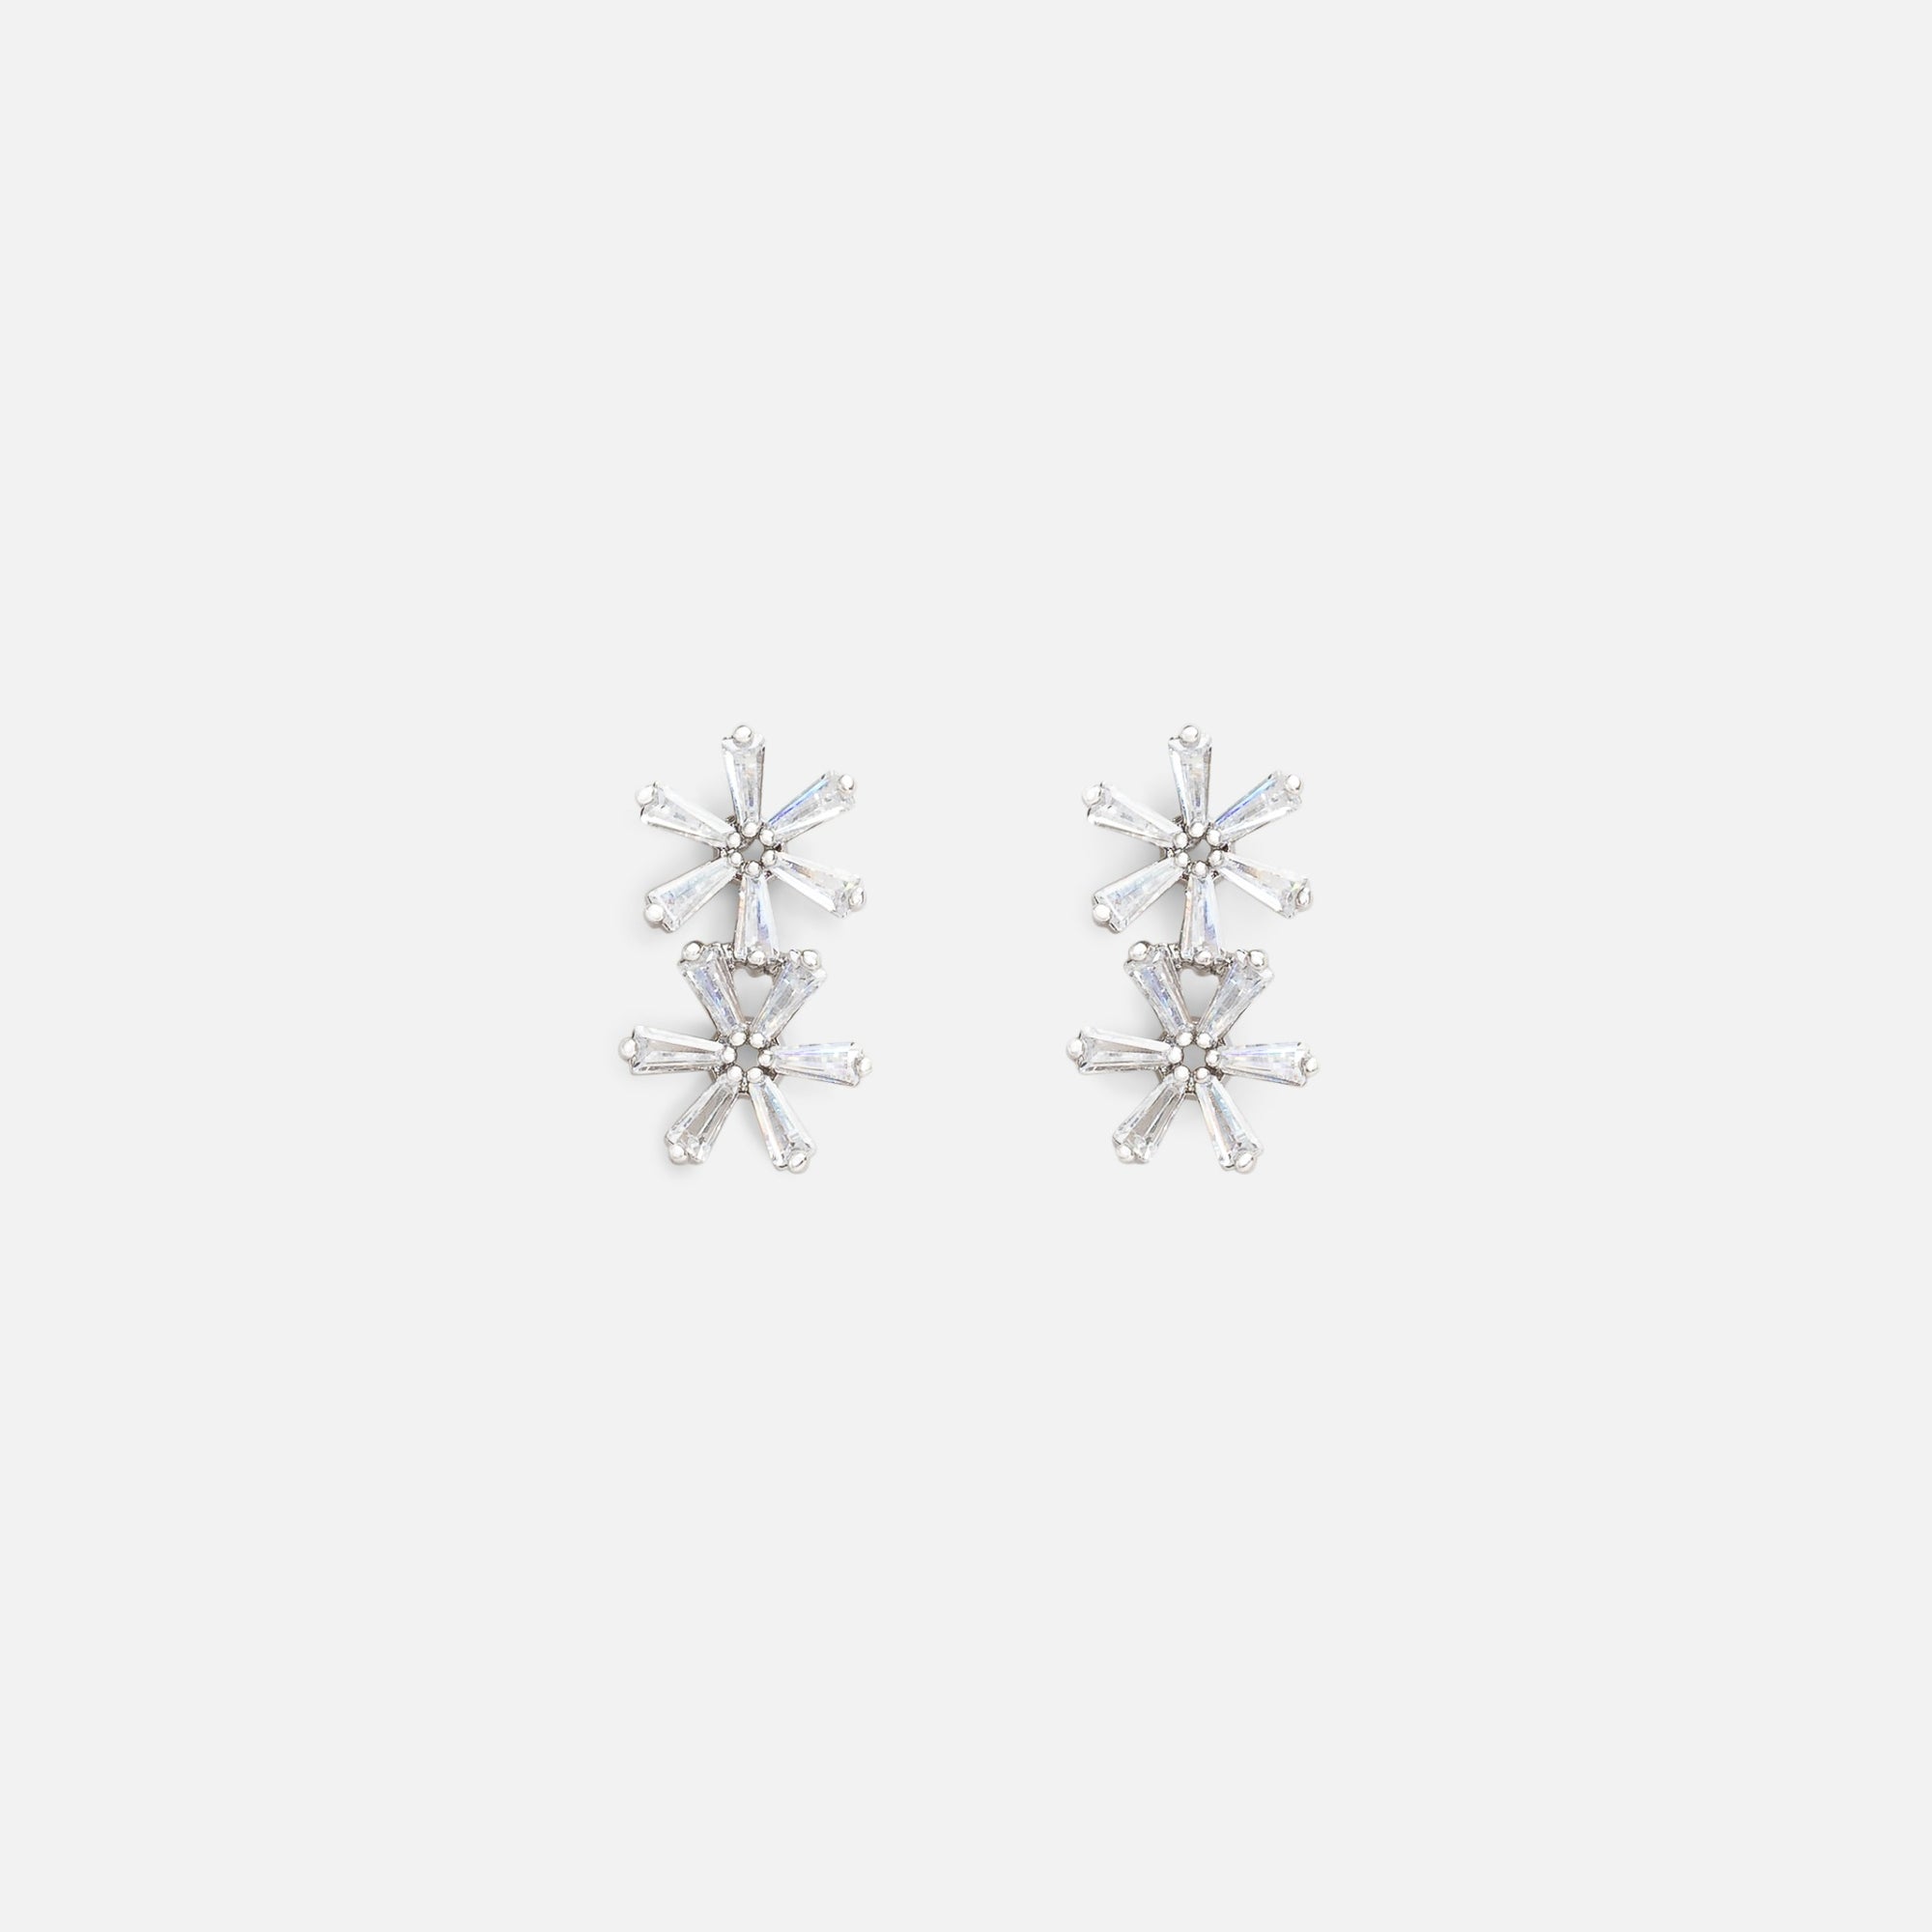 Silver earrings with small flowers